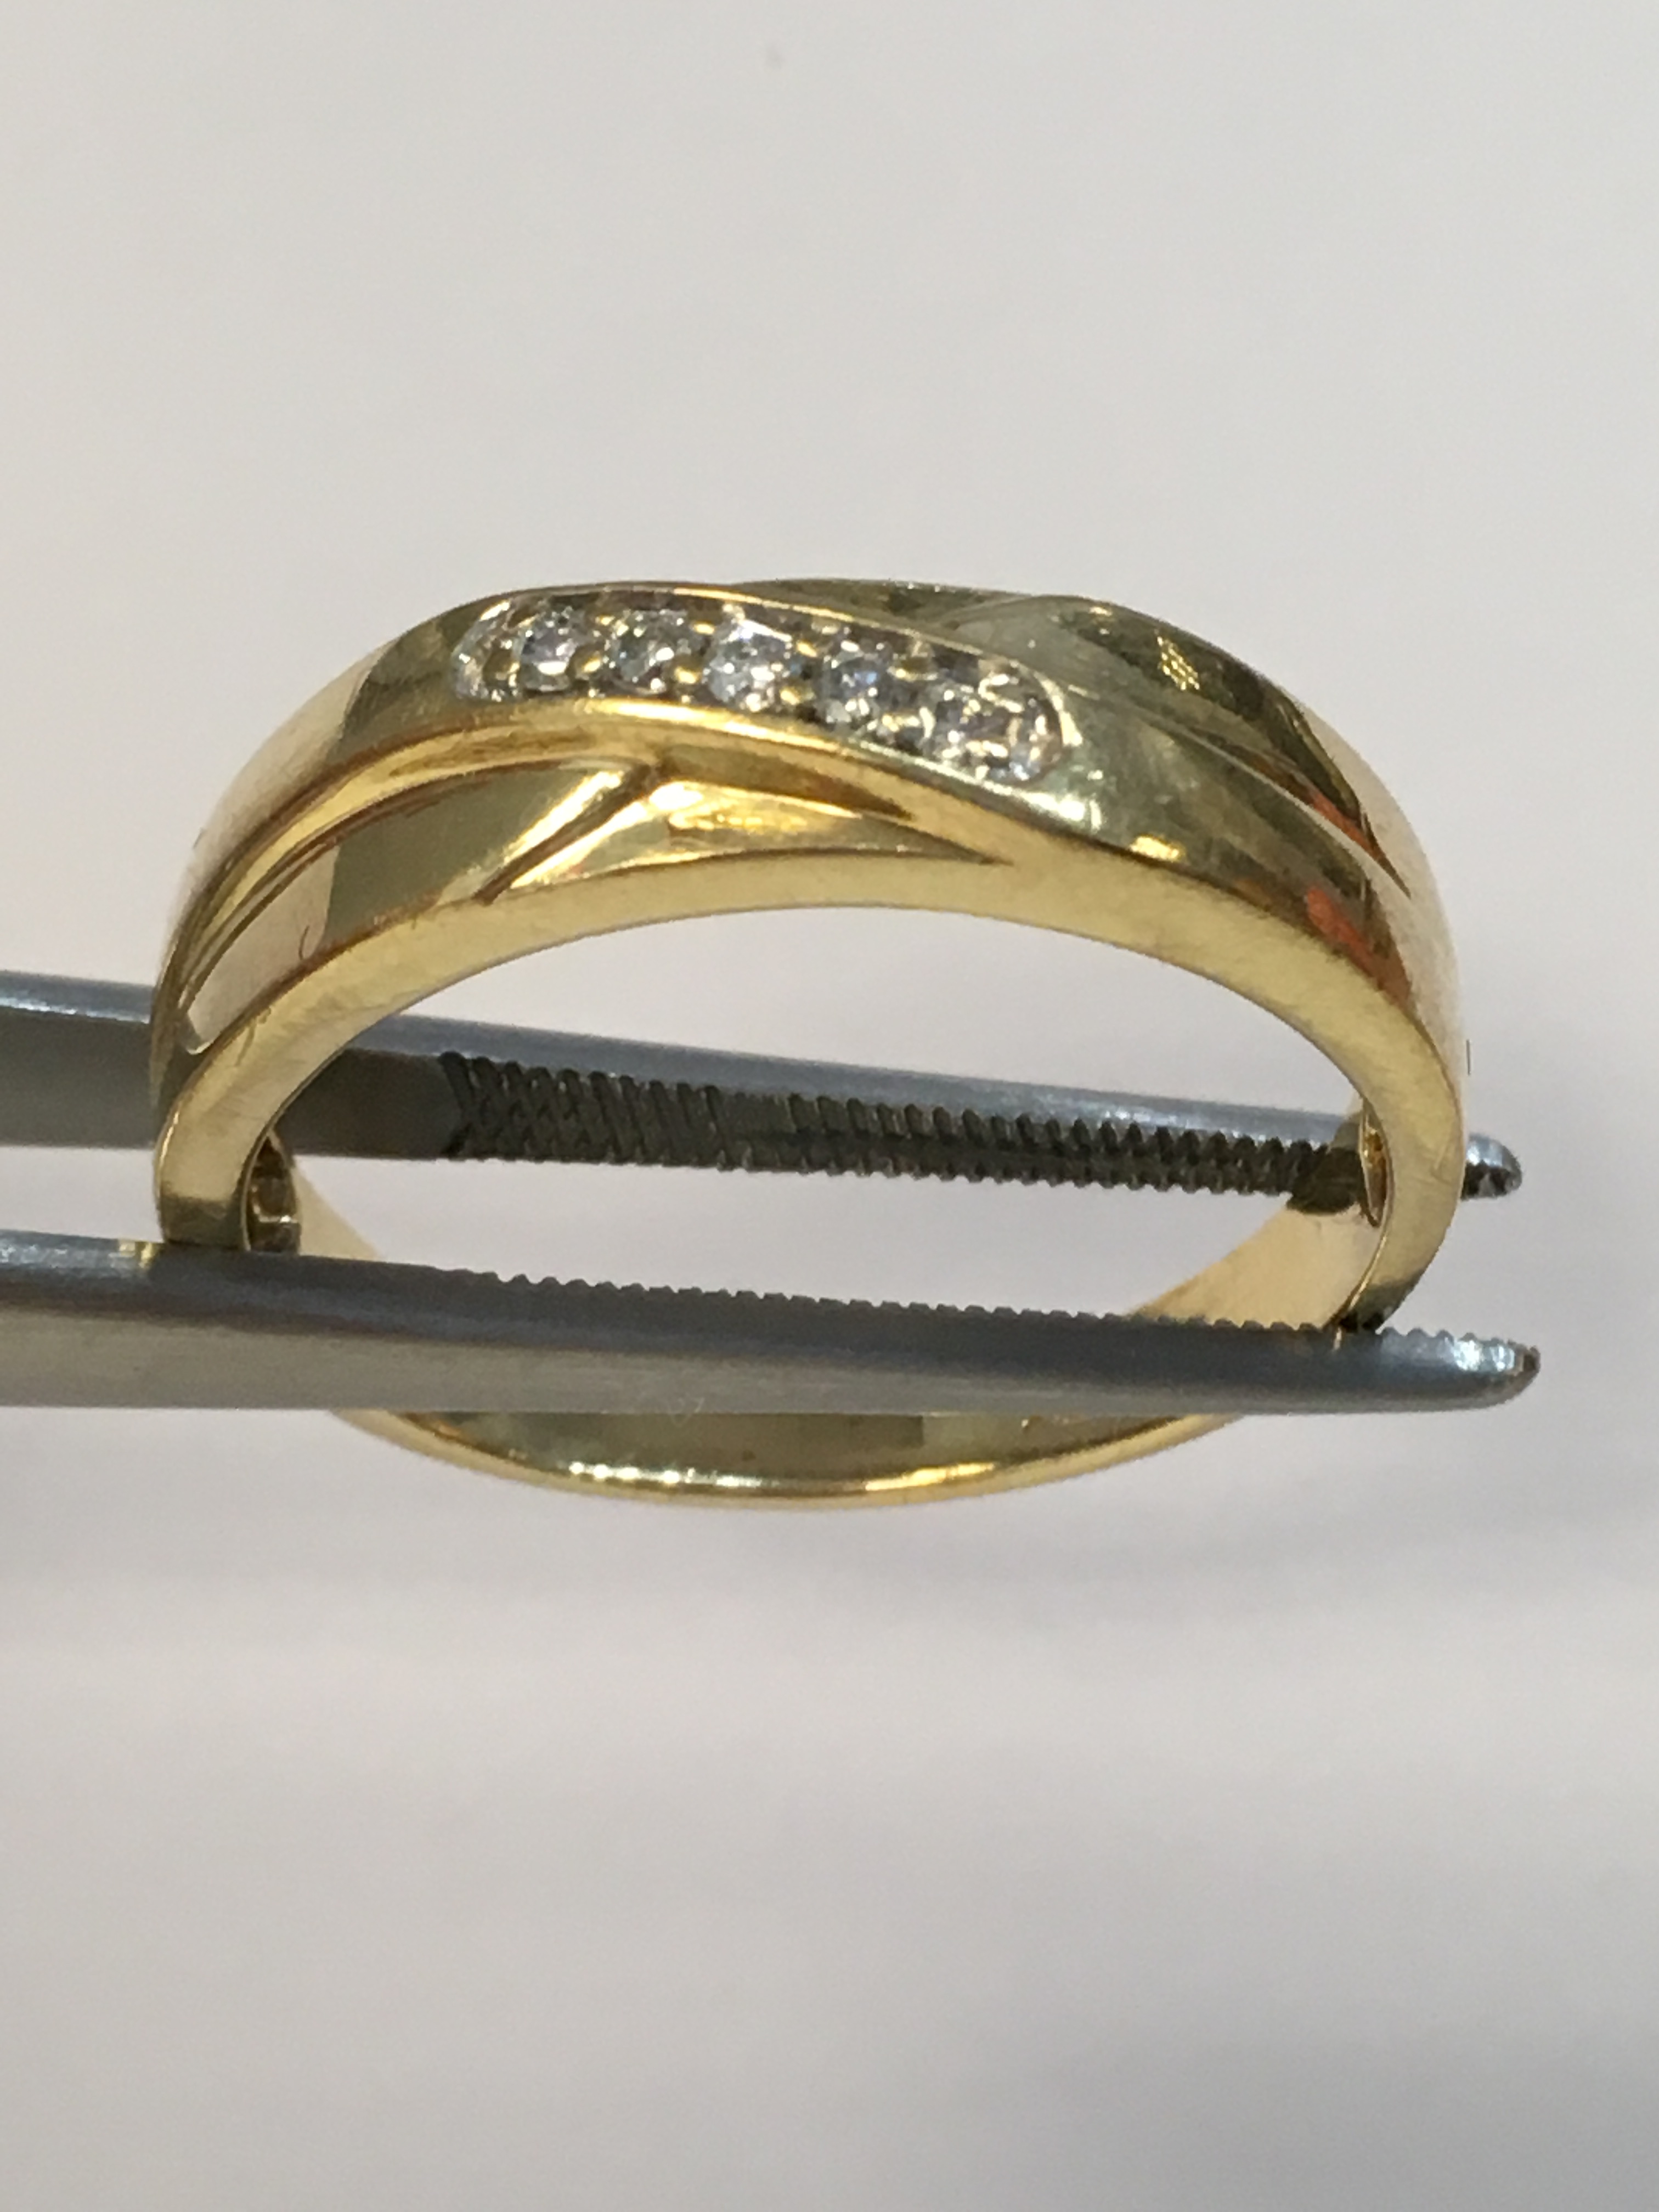 10K Yellow Gold Band with 5 Diamonds 0.08ct - Image 3 of 3